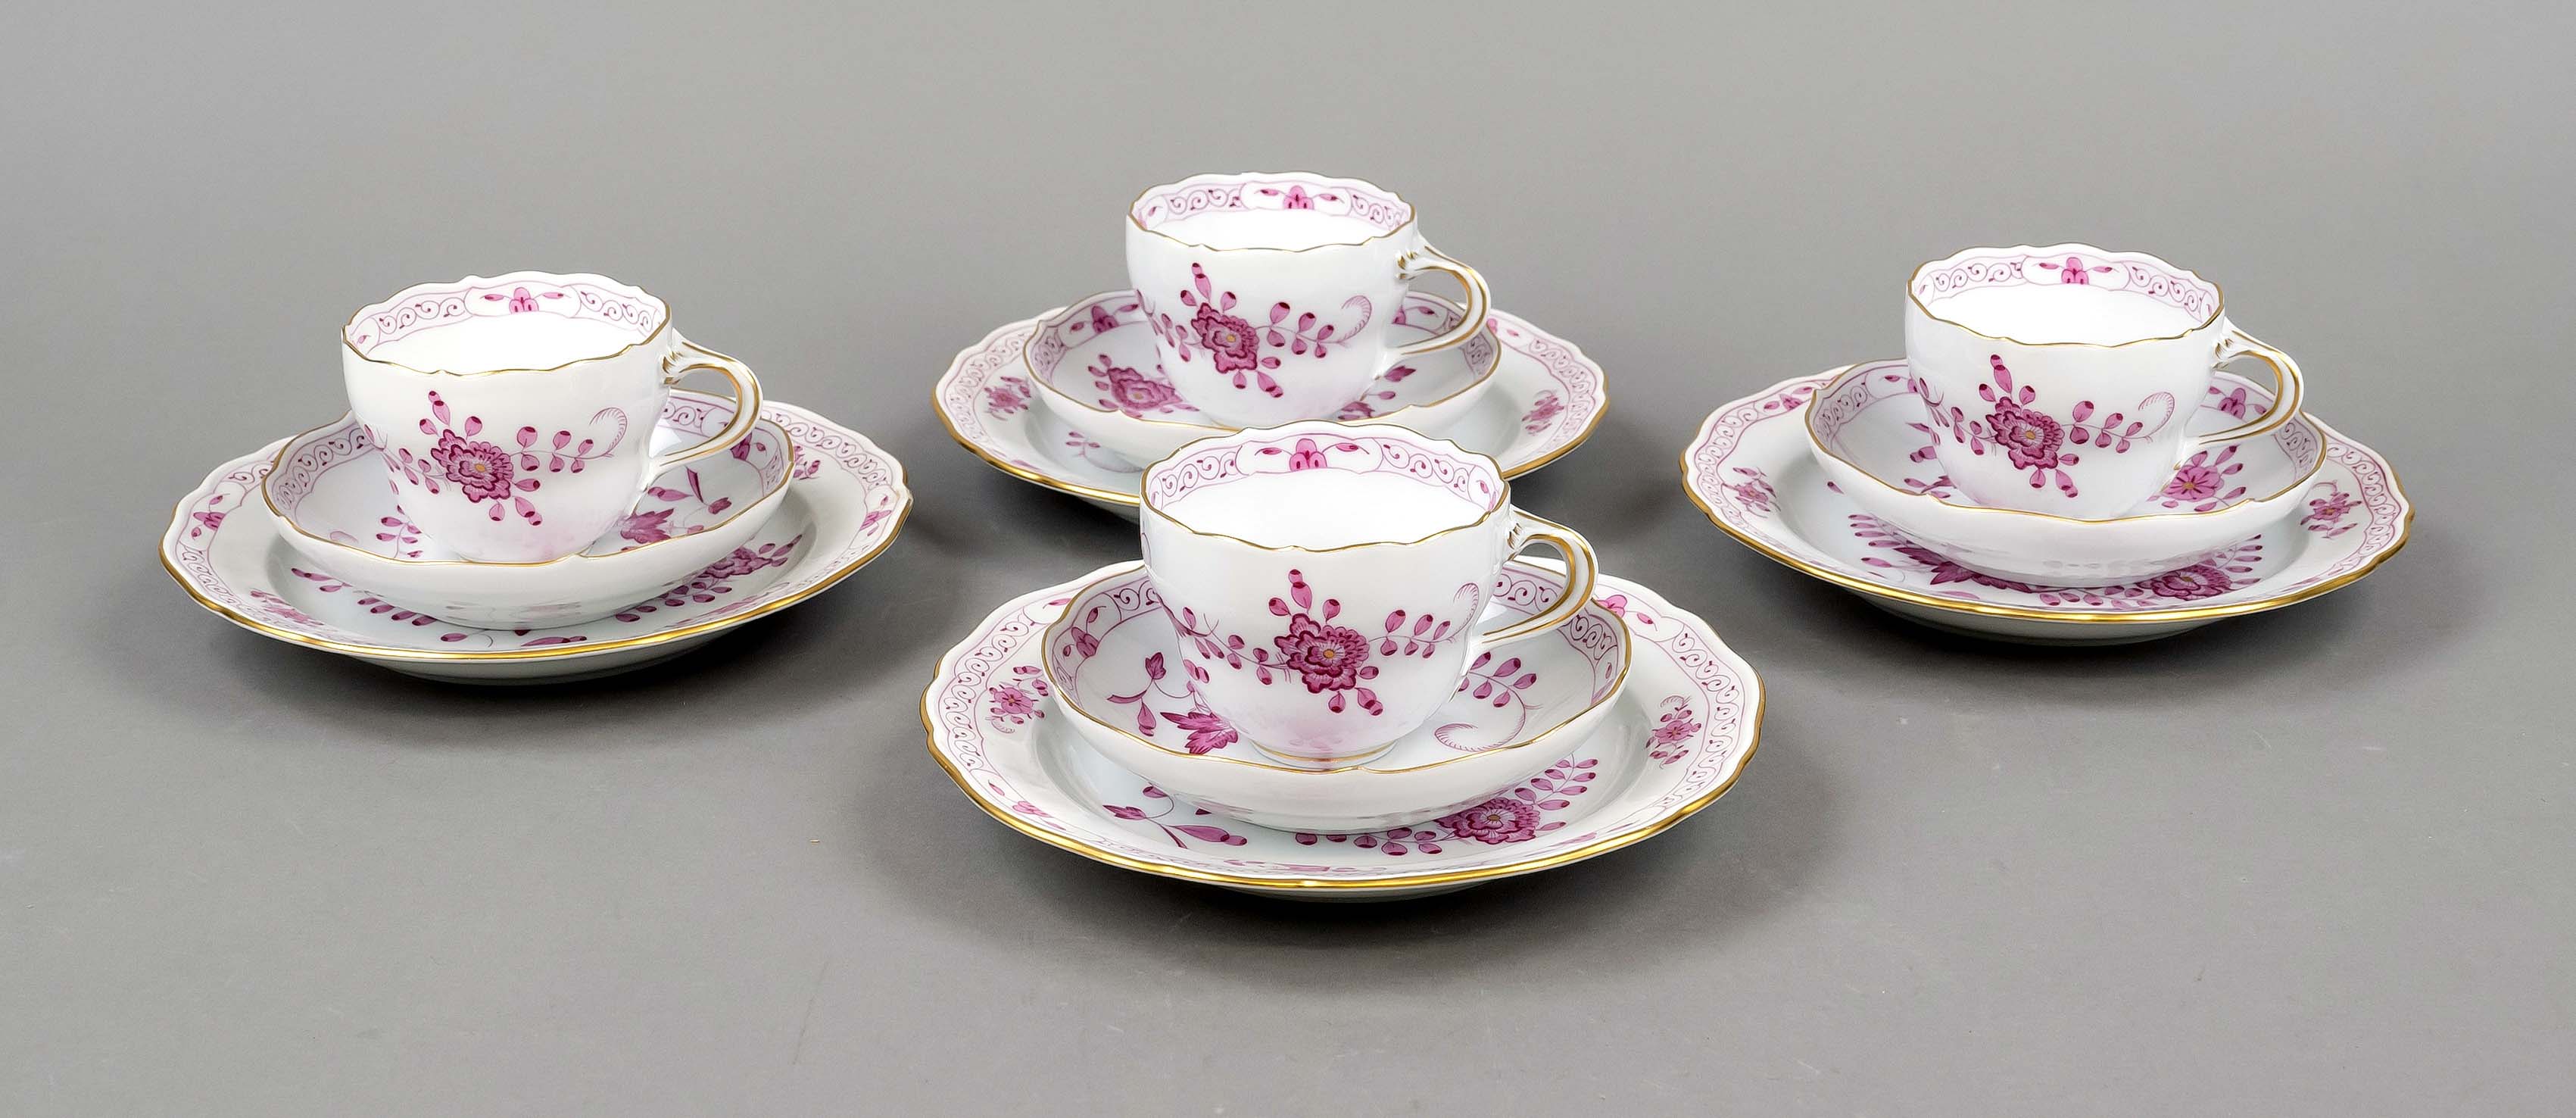 Four coffee sets, 12 pieces, Meissen, mark after 1980, 2nd choice, shape New Cutout, decor Indian